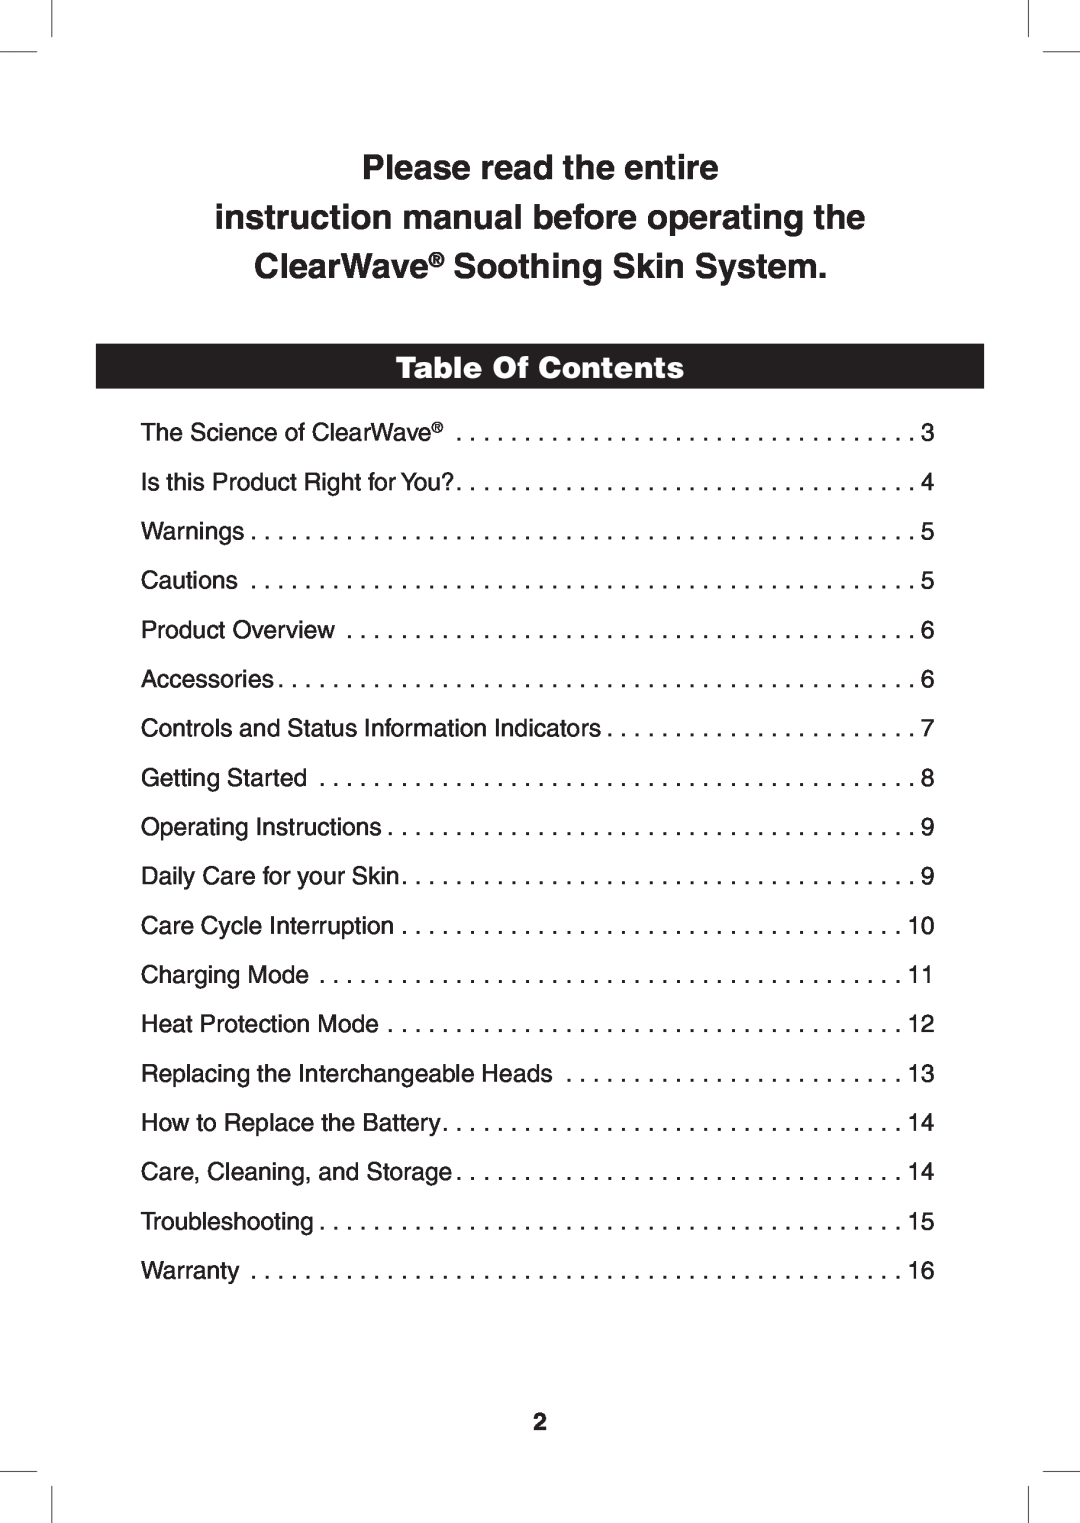 Verilux CWST2RB manual Table Of Contents, Please read the entire, ClearWave Soothing Skin System 